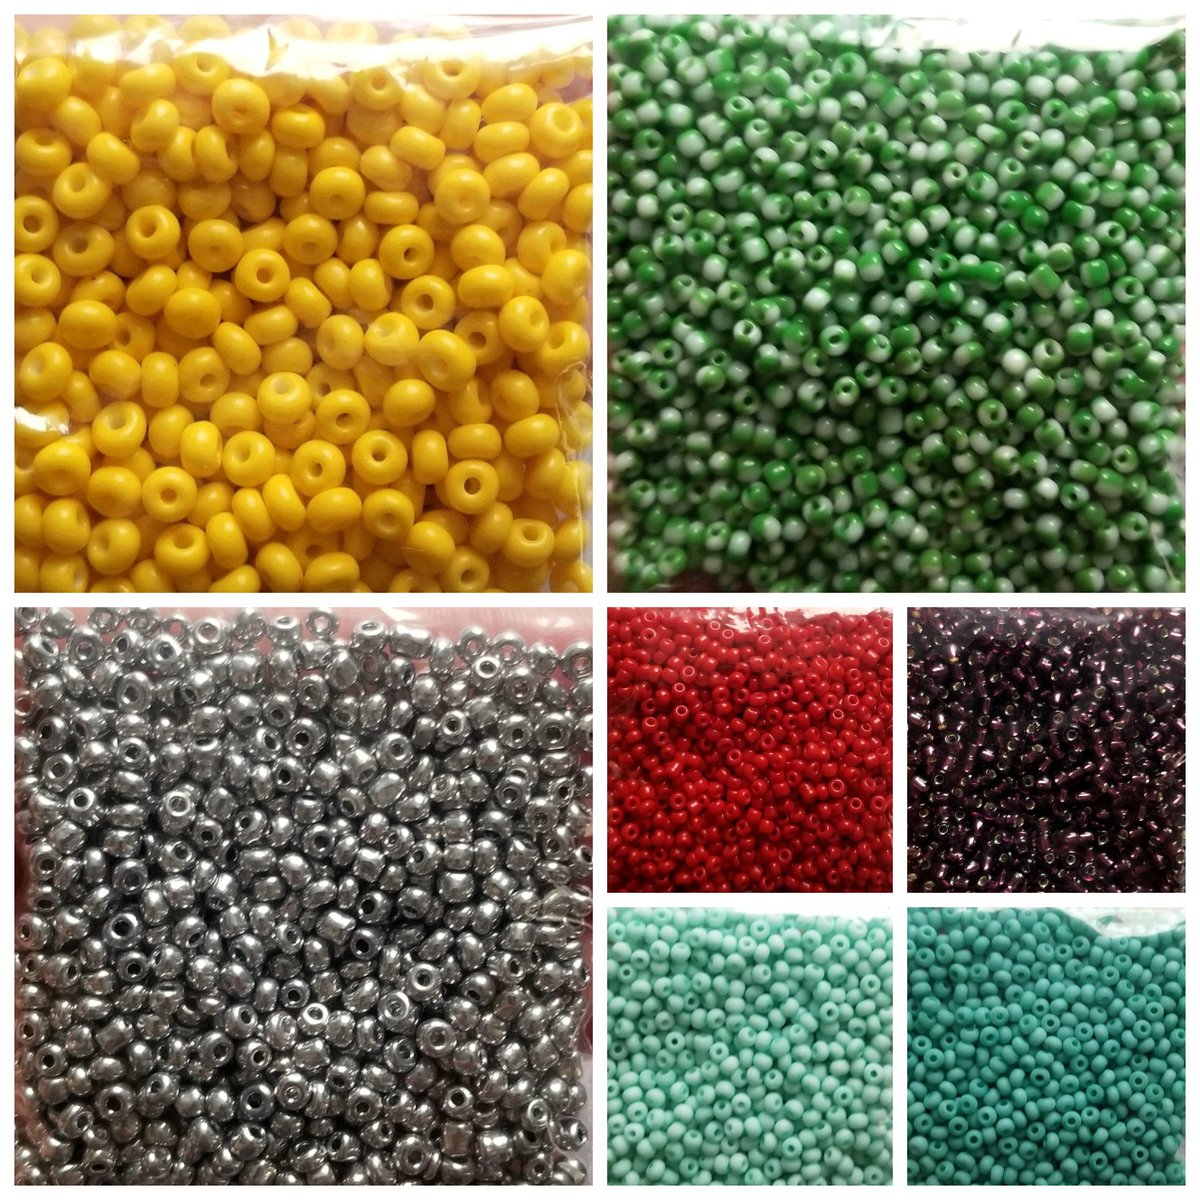 25g #Glass #Seed #Beads #seedbeads Various Sizes #Christmas #Beading #JewelleryMaking #Embroidery #CrossStitch #Craft 2mm 3mm 4mm Green Red Silver Cyan Yellow etsy.me/4b7tfsH via @Etsy